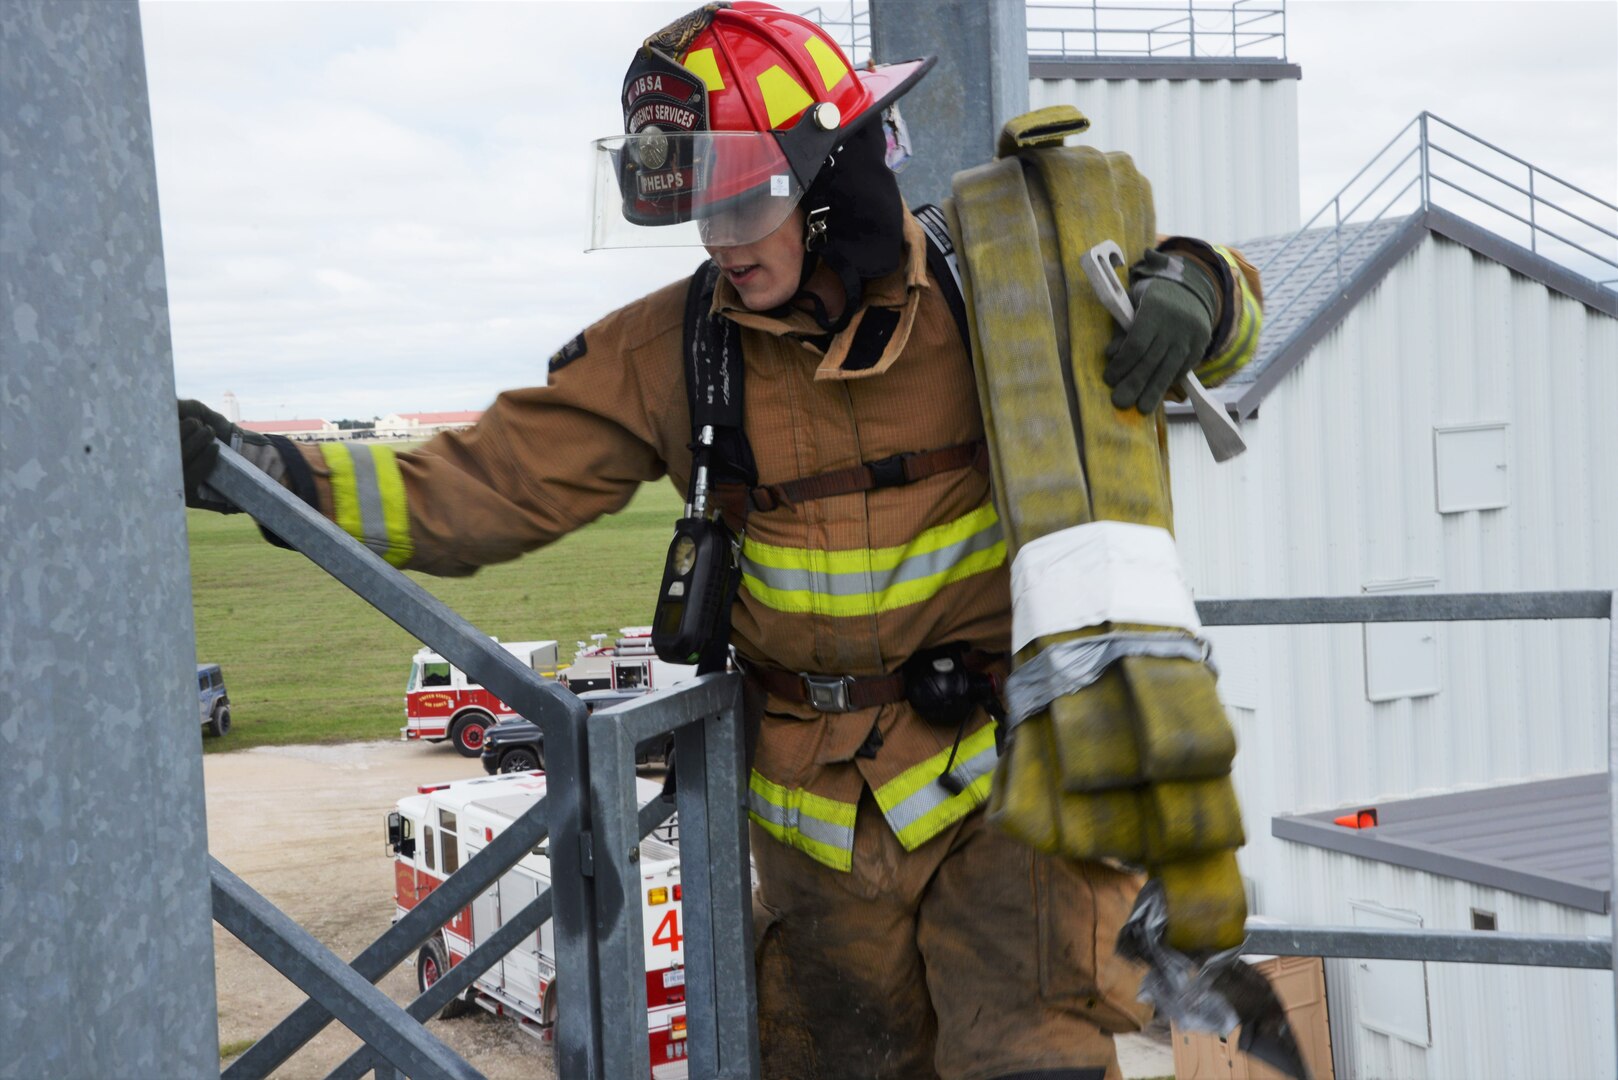 Staff Sgt. Justin Phelps, 902nd Civil Engineer Squadron lead firefighter, races up the stairs while carrying a hose during the firefighter fitness challenge portion of the Battle of the Badges competition Oct. 20, 2018, at Joint Base San Antonio-Randolph’s Camp Talon. Firefighters and security forces members from Joint Base San Antonio locations have competed in Battle of the Badges for the past three years. The initiative was designed to build stronger bonds between the agencies and has become a tradition for the unit members, their families and friends.